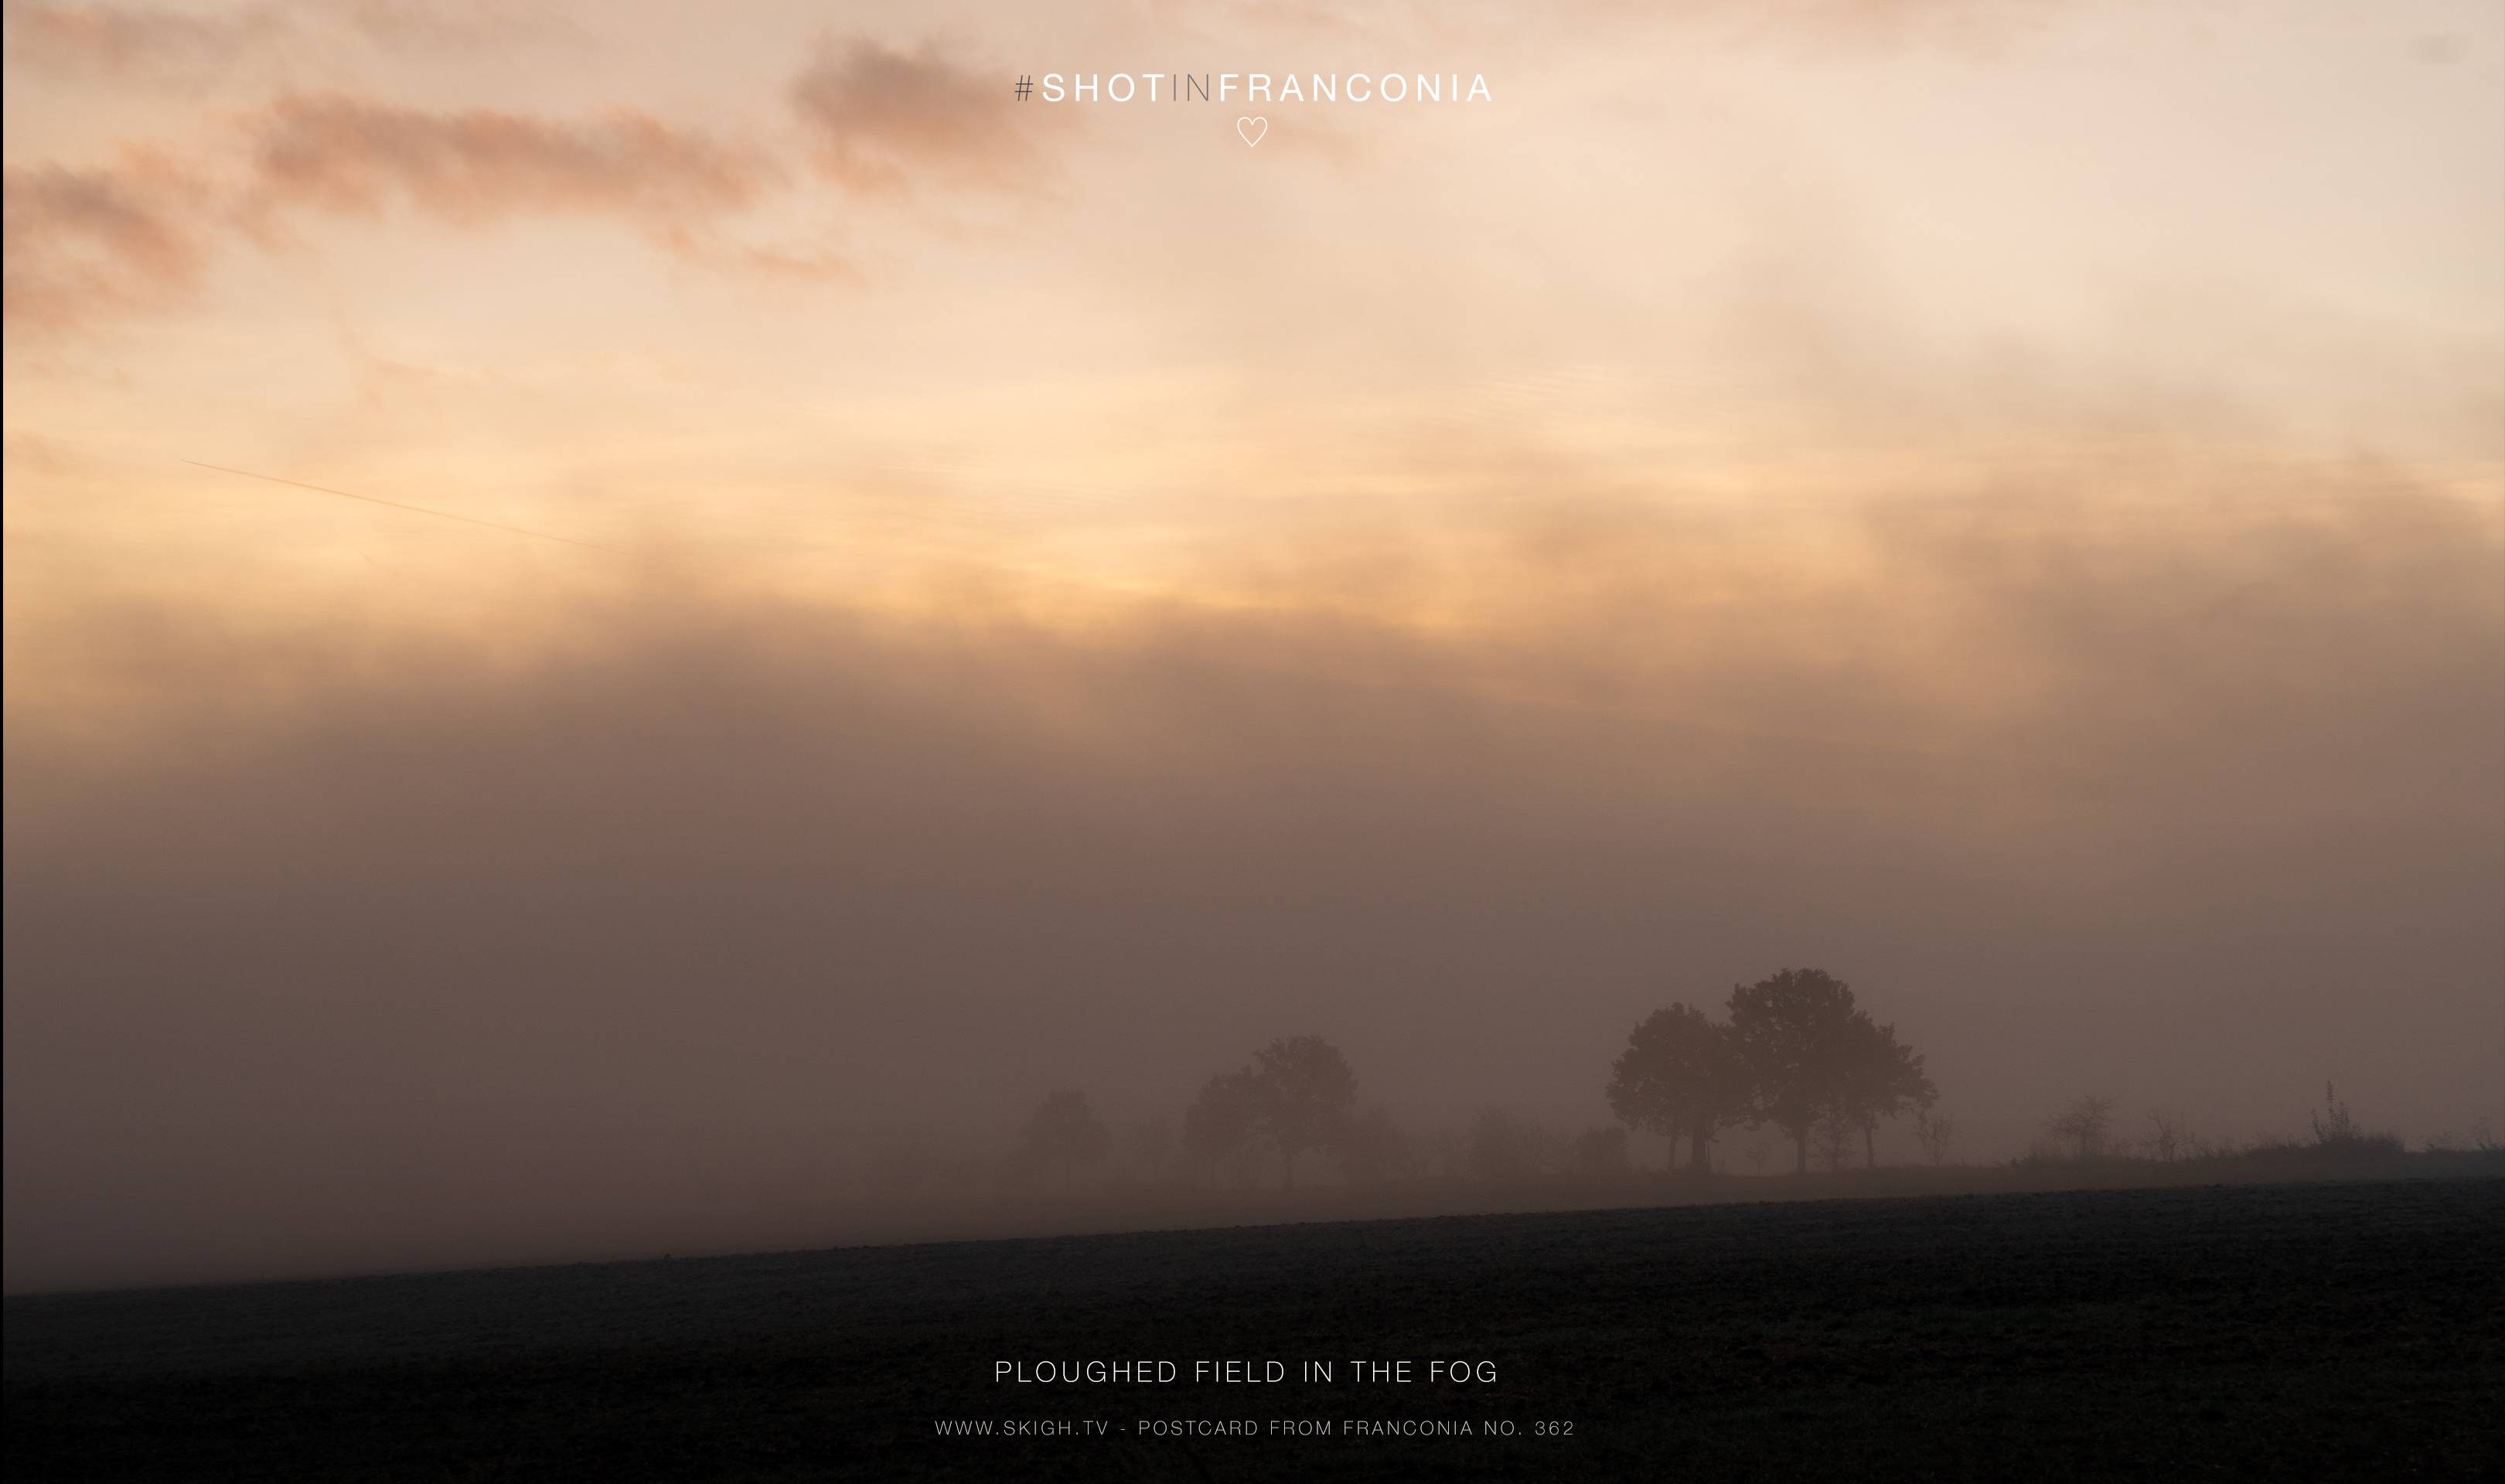 Ploughed field in the fog